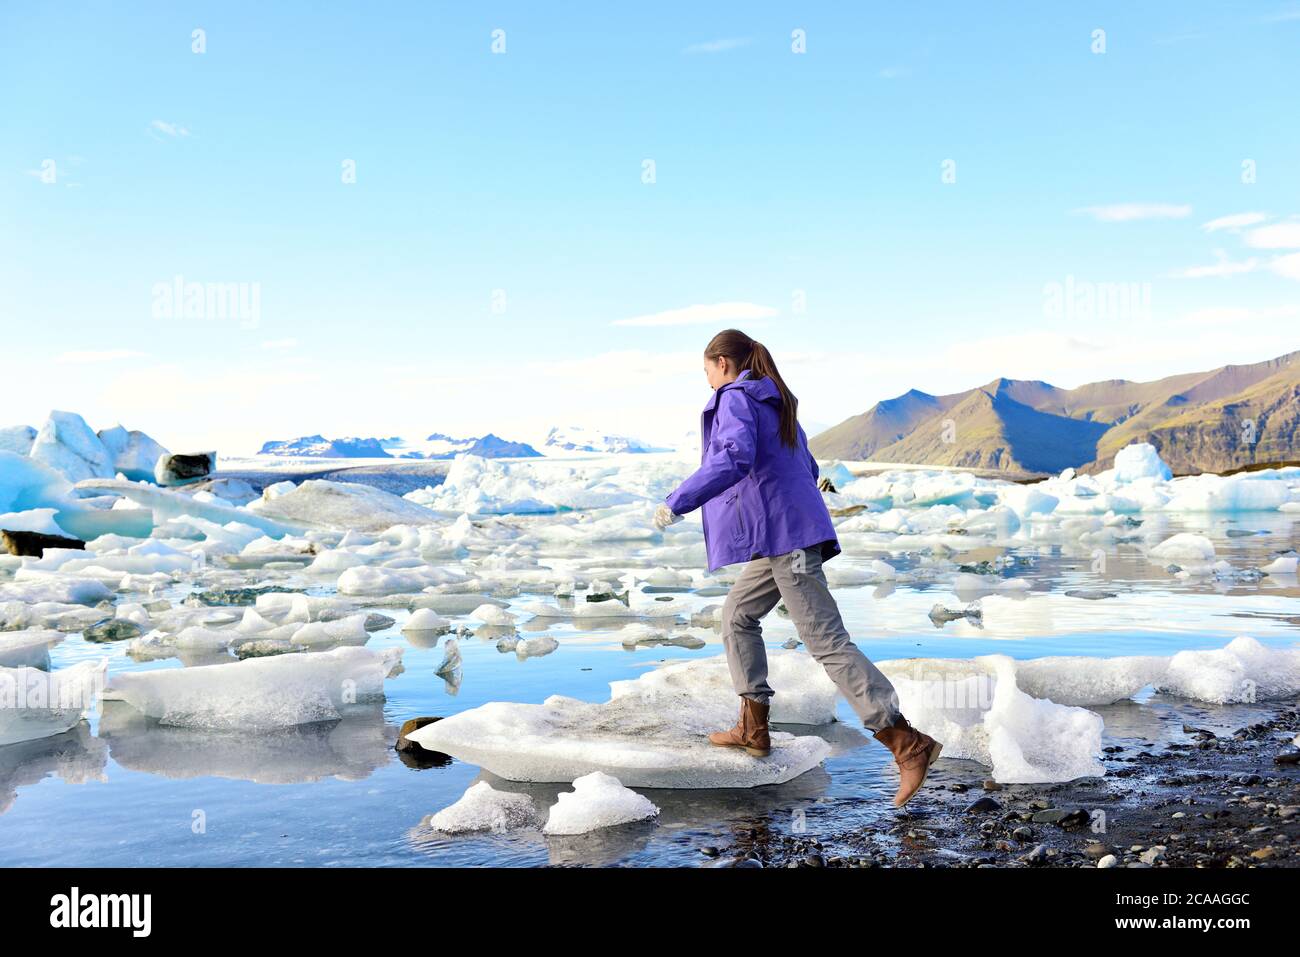 Iceland travel tourist walking on ice looking at view of nature landscape Jokulsarlon glacial lagoon on Iceland. Woman hiking by tourist destination Stock Photo